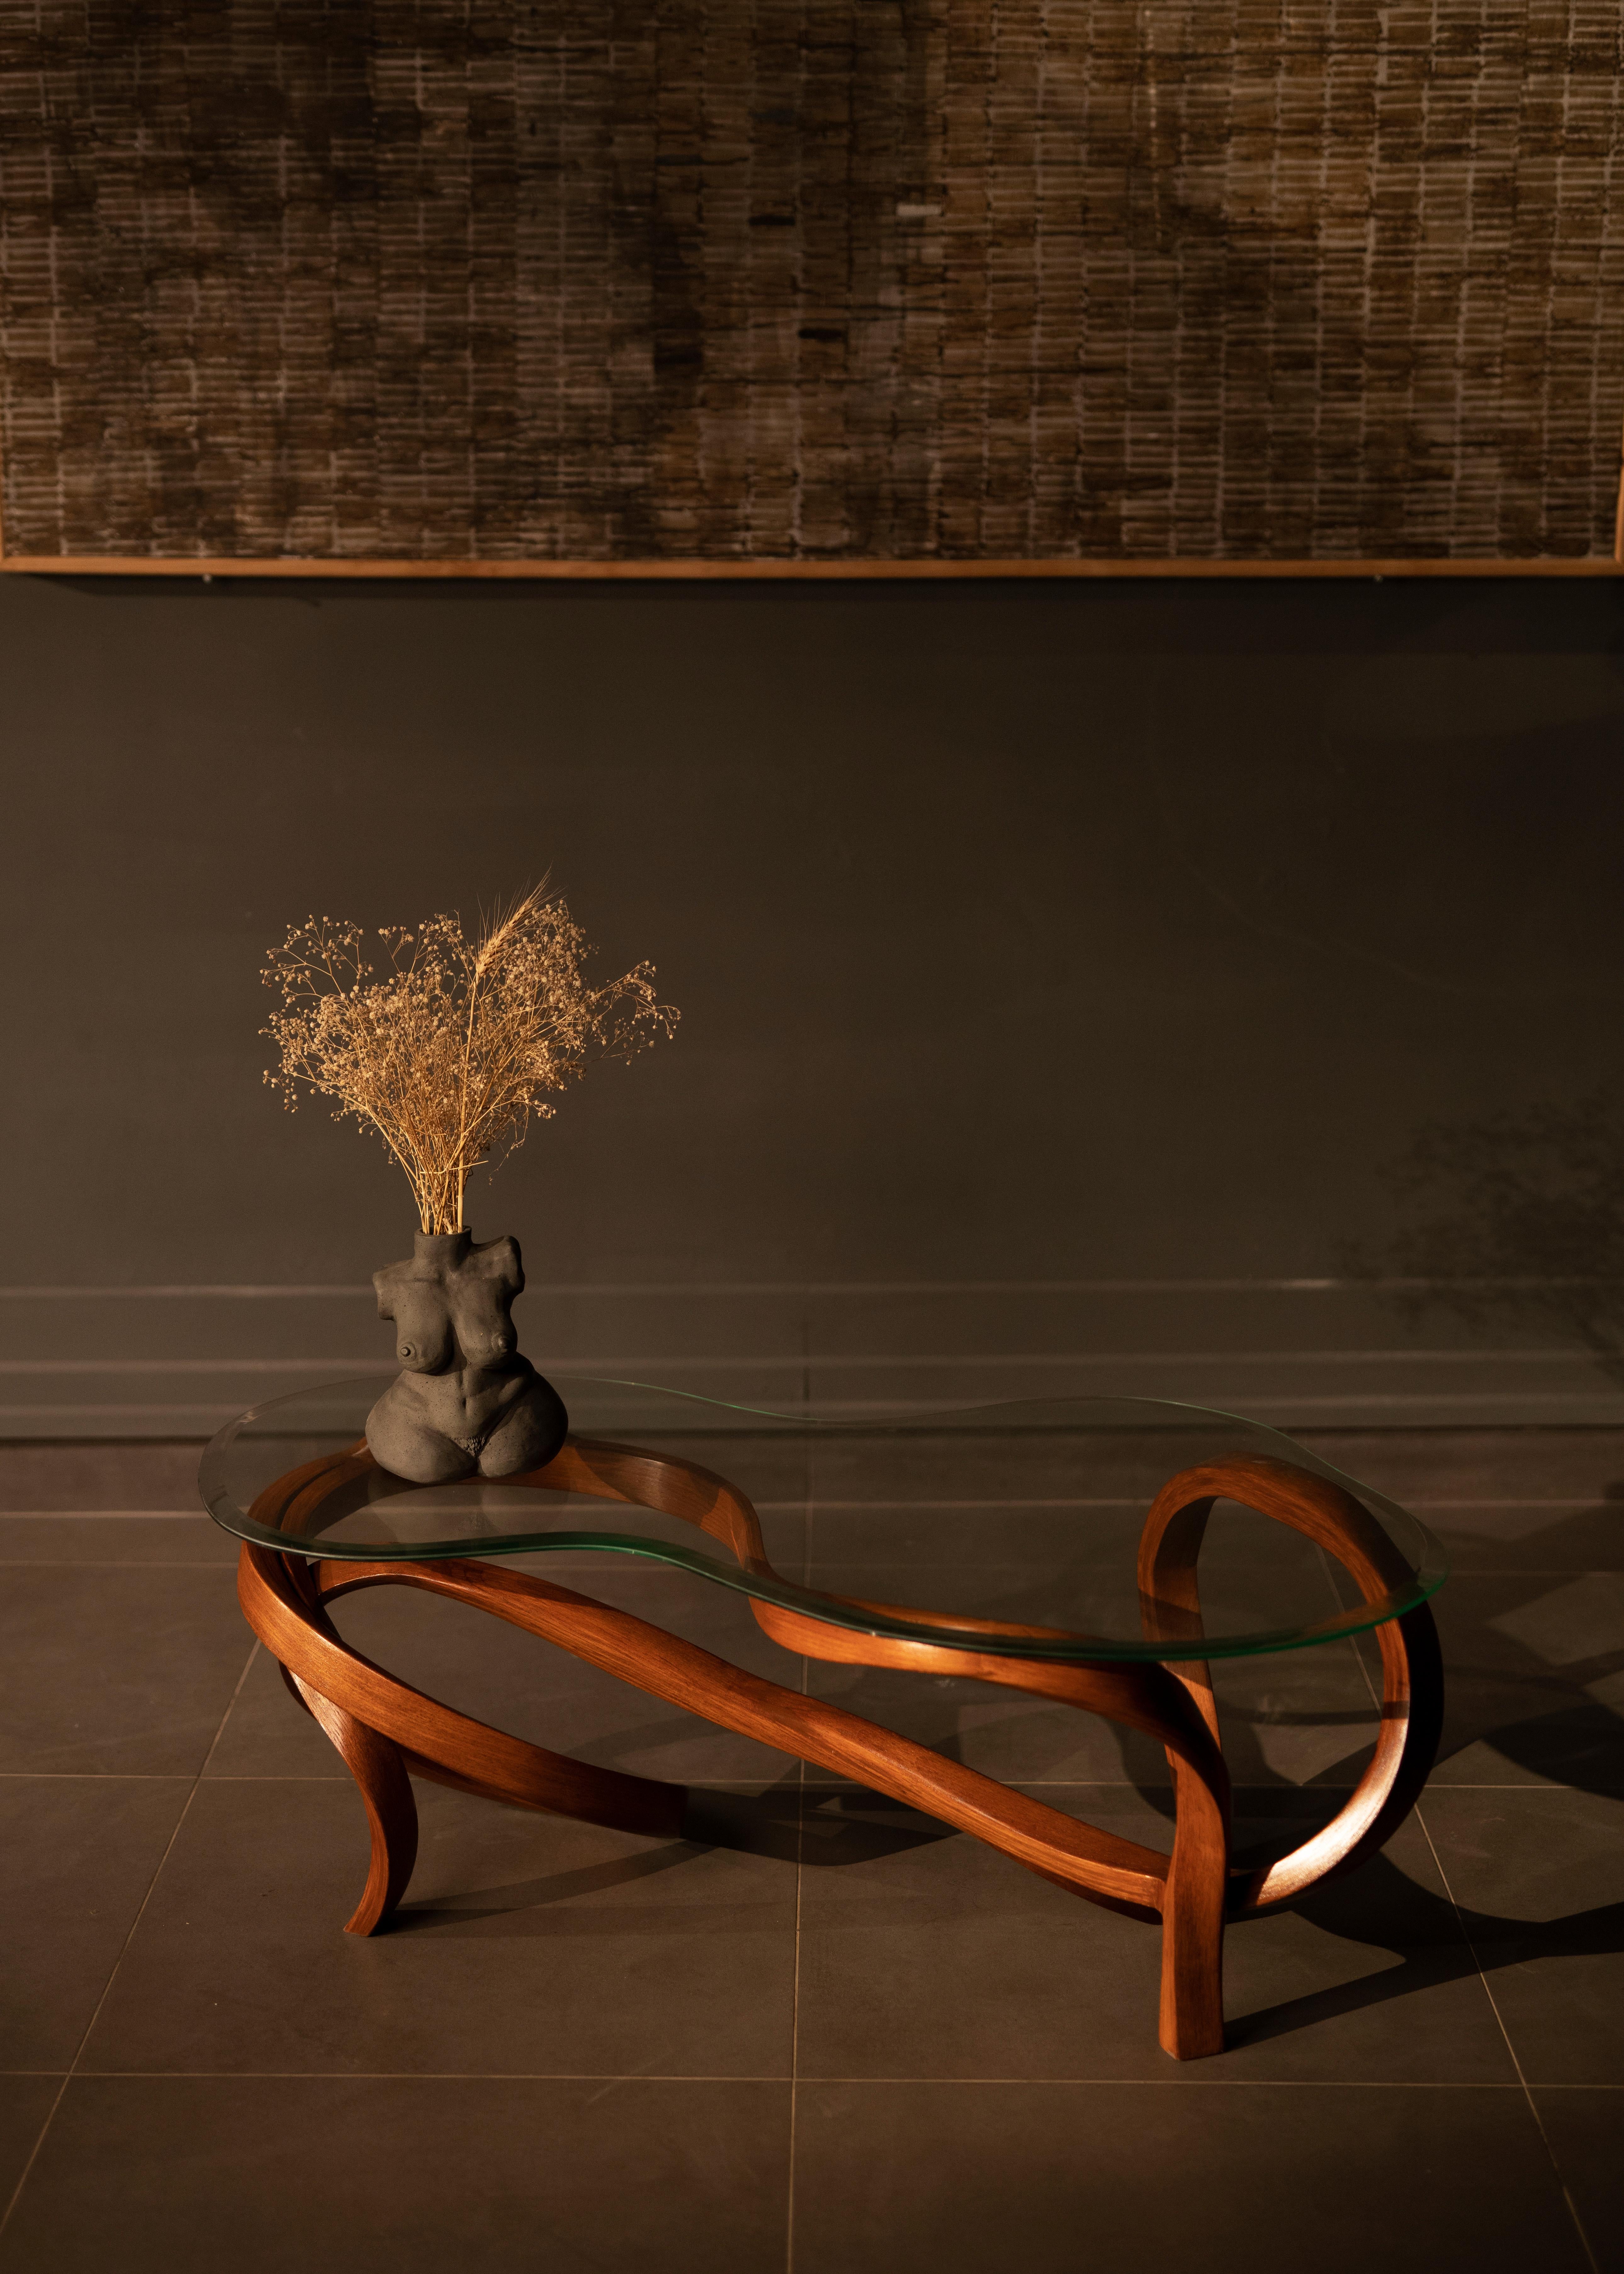 The Vrksa Series is based on bending solid wood to create the pieces, this has allowed us to design handmade furniture in a unique aesthetic in which the natural flow of the wood takes the reins of design. No two pieces are exactly the same because